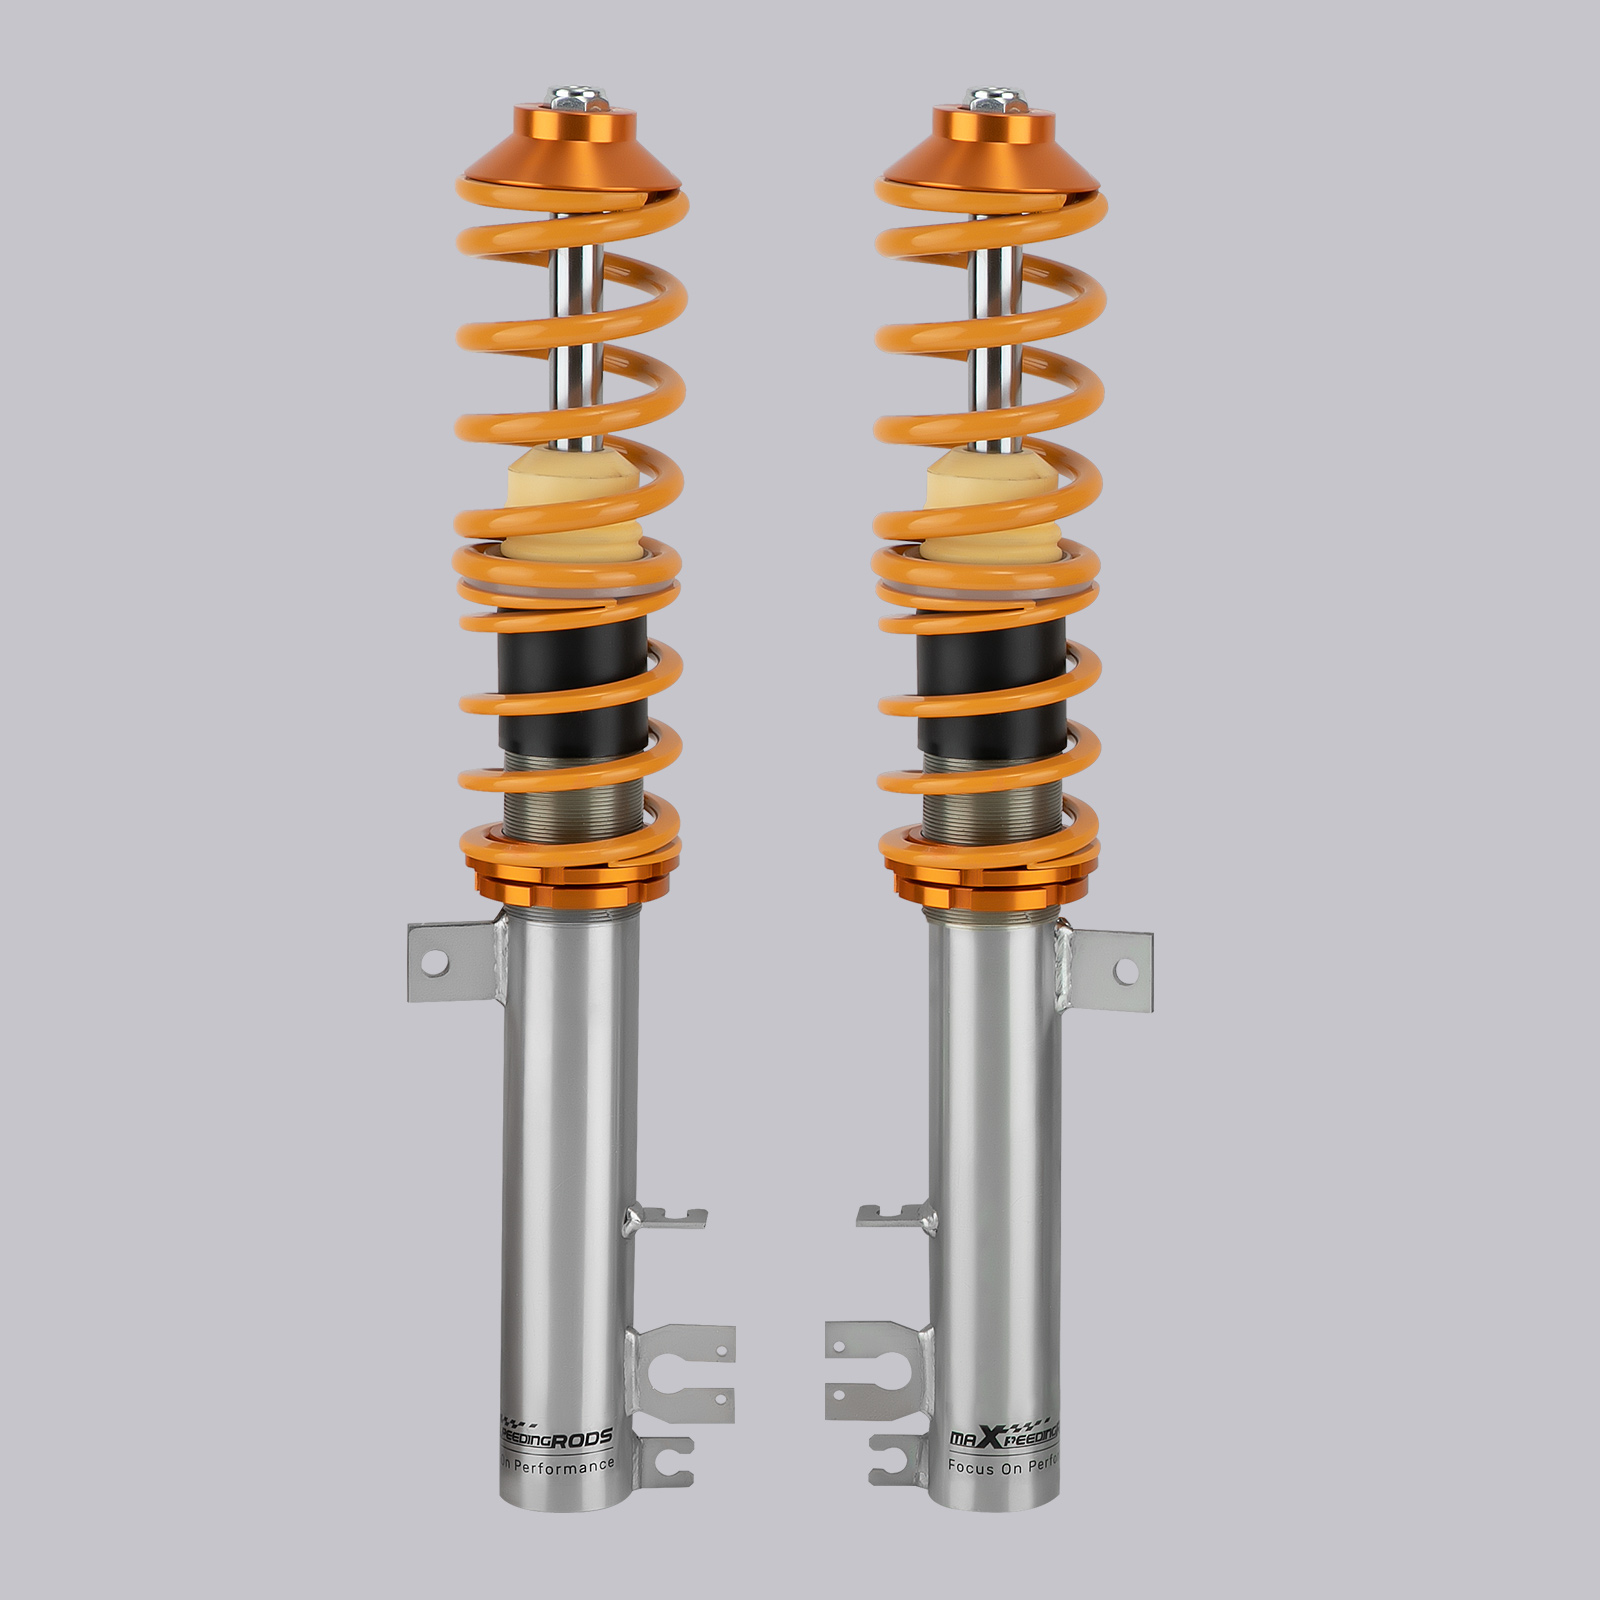 Coilovers Suspension Kit for Fiat 500 Cabriolet 312 abarth 0.9 1.2 1.3 1.4